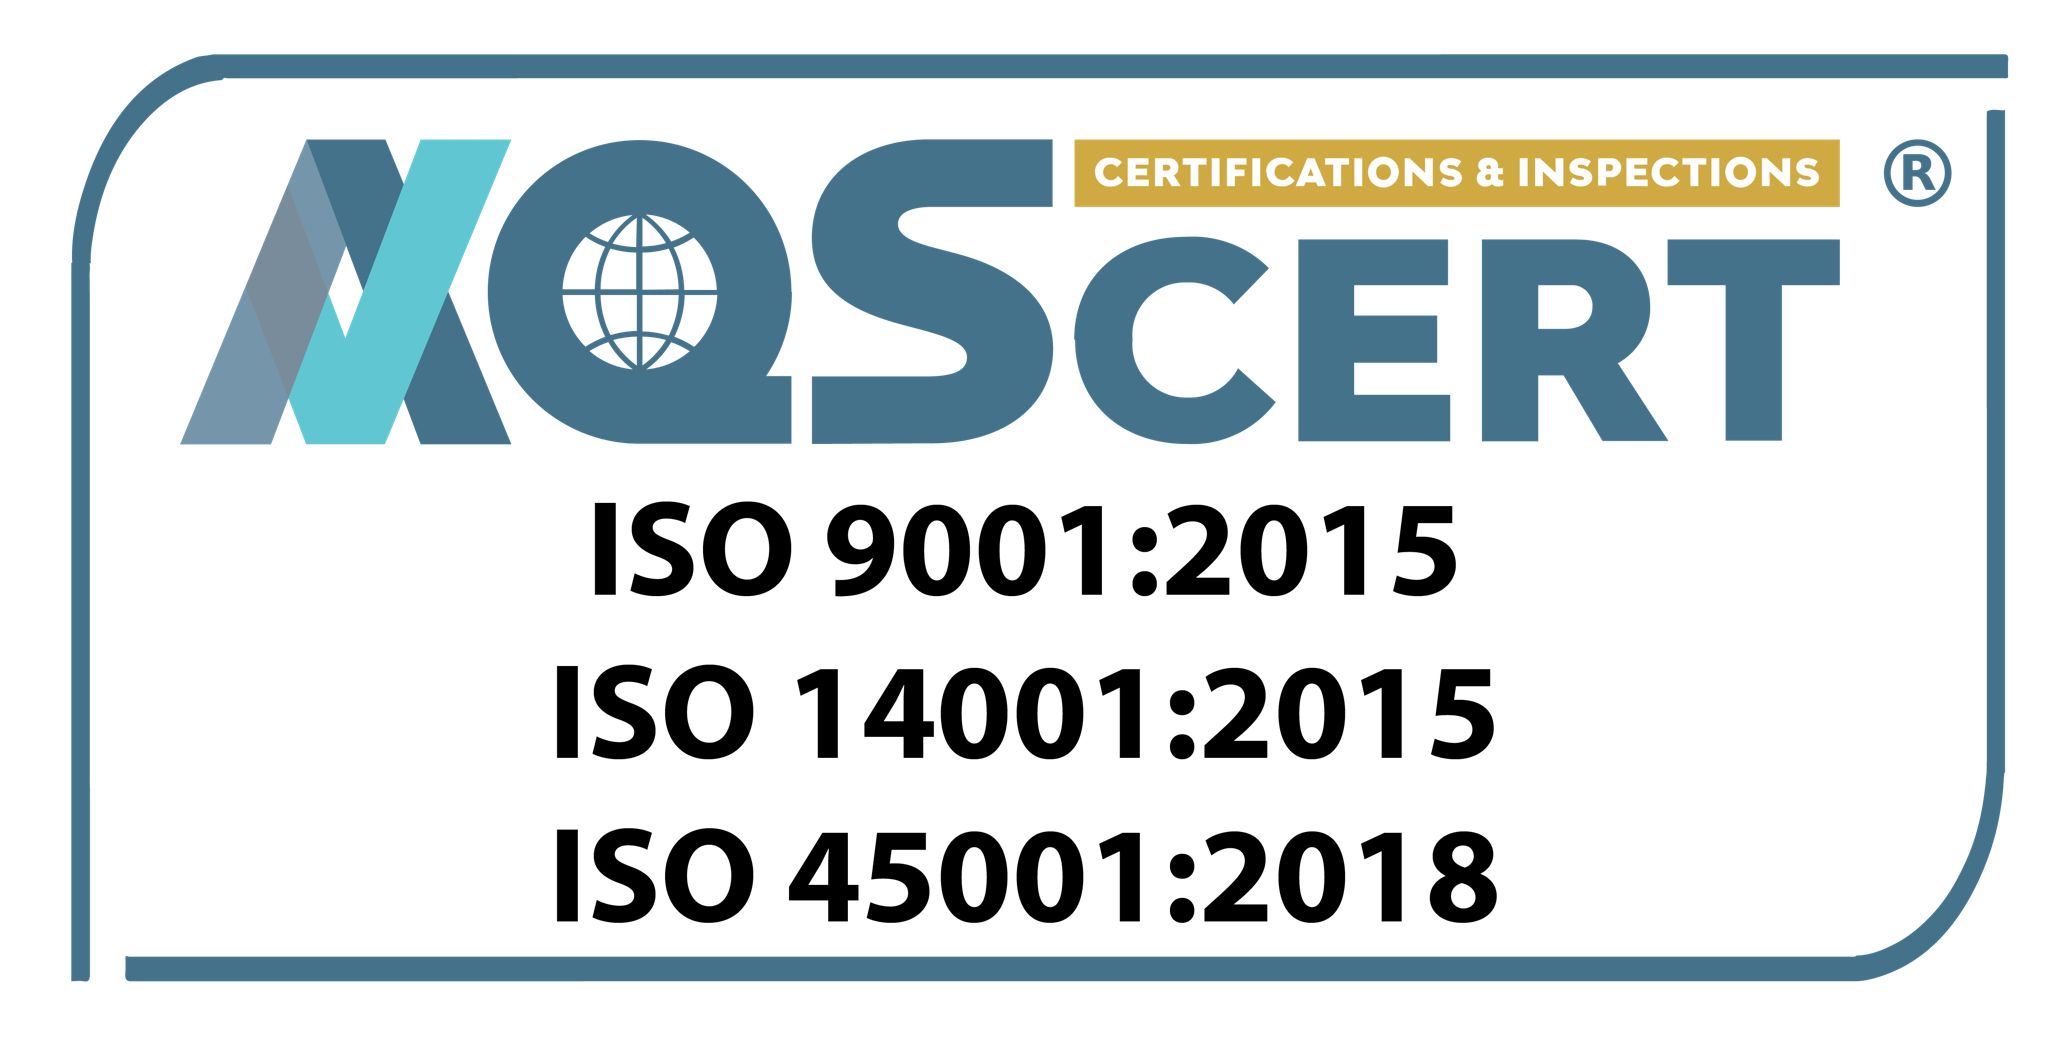 Certifications & Inspections